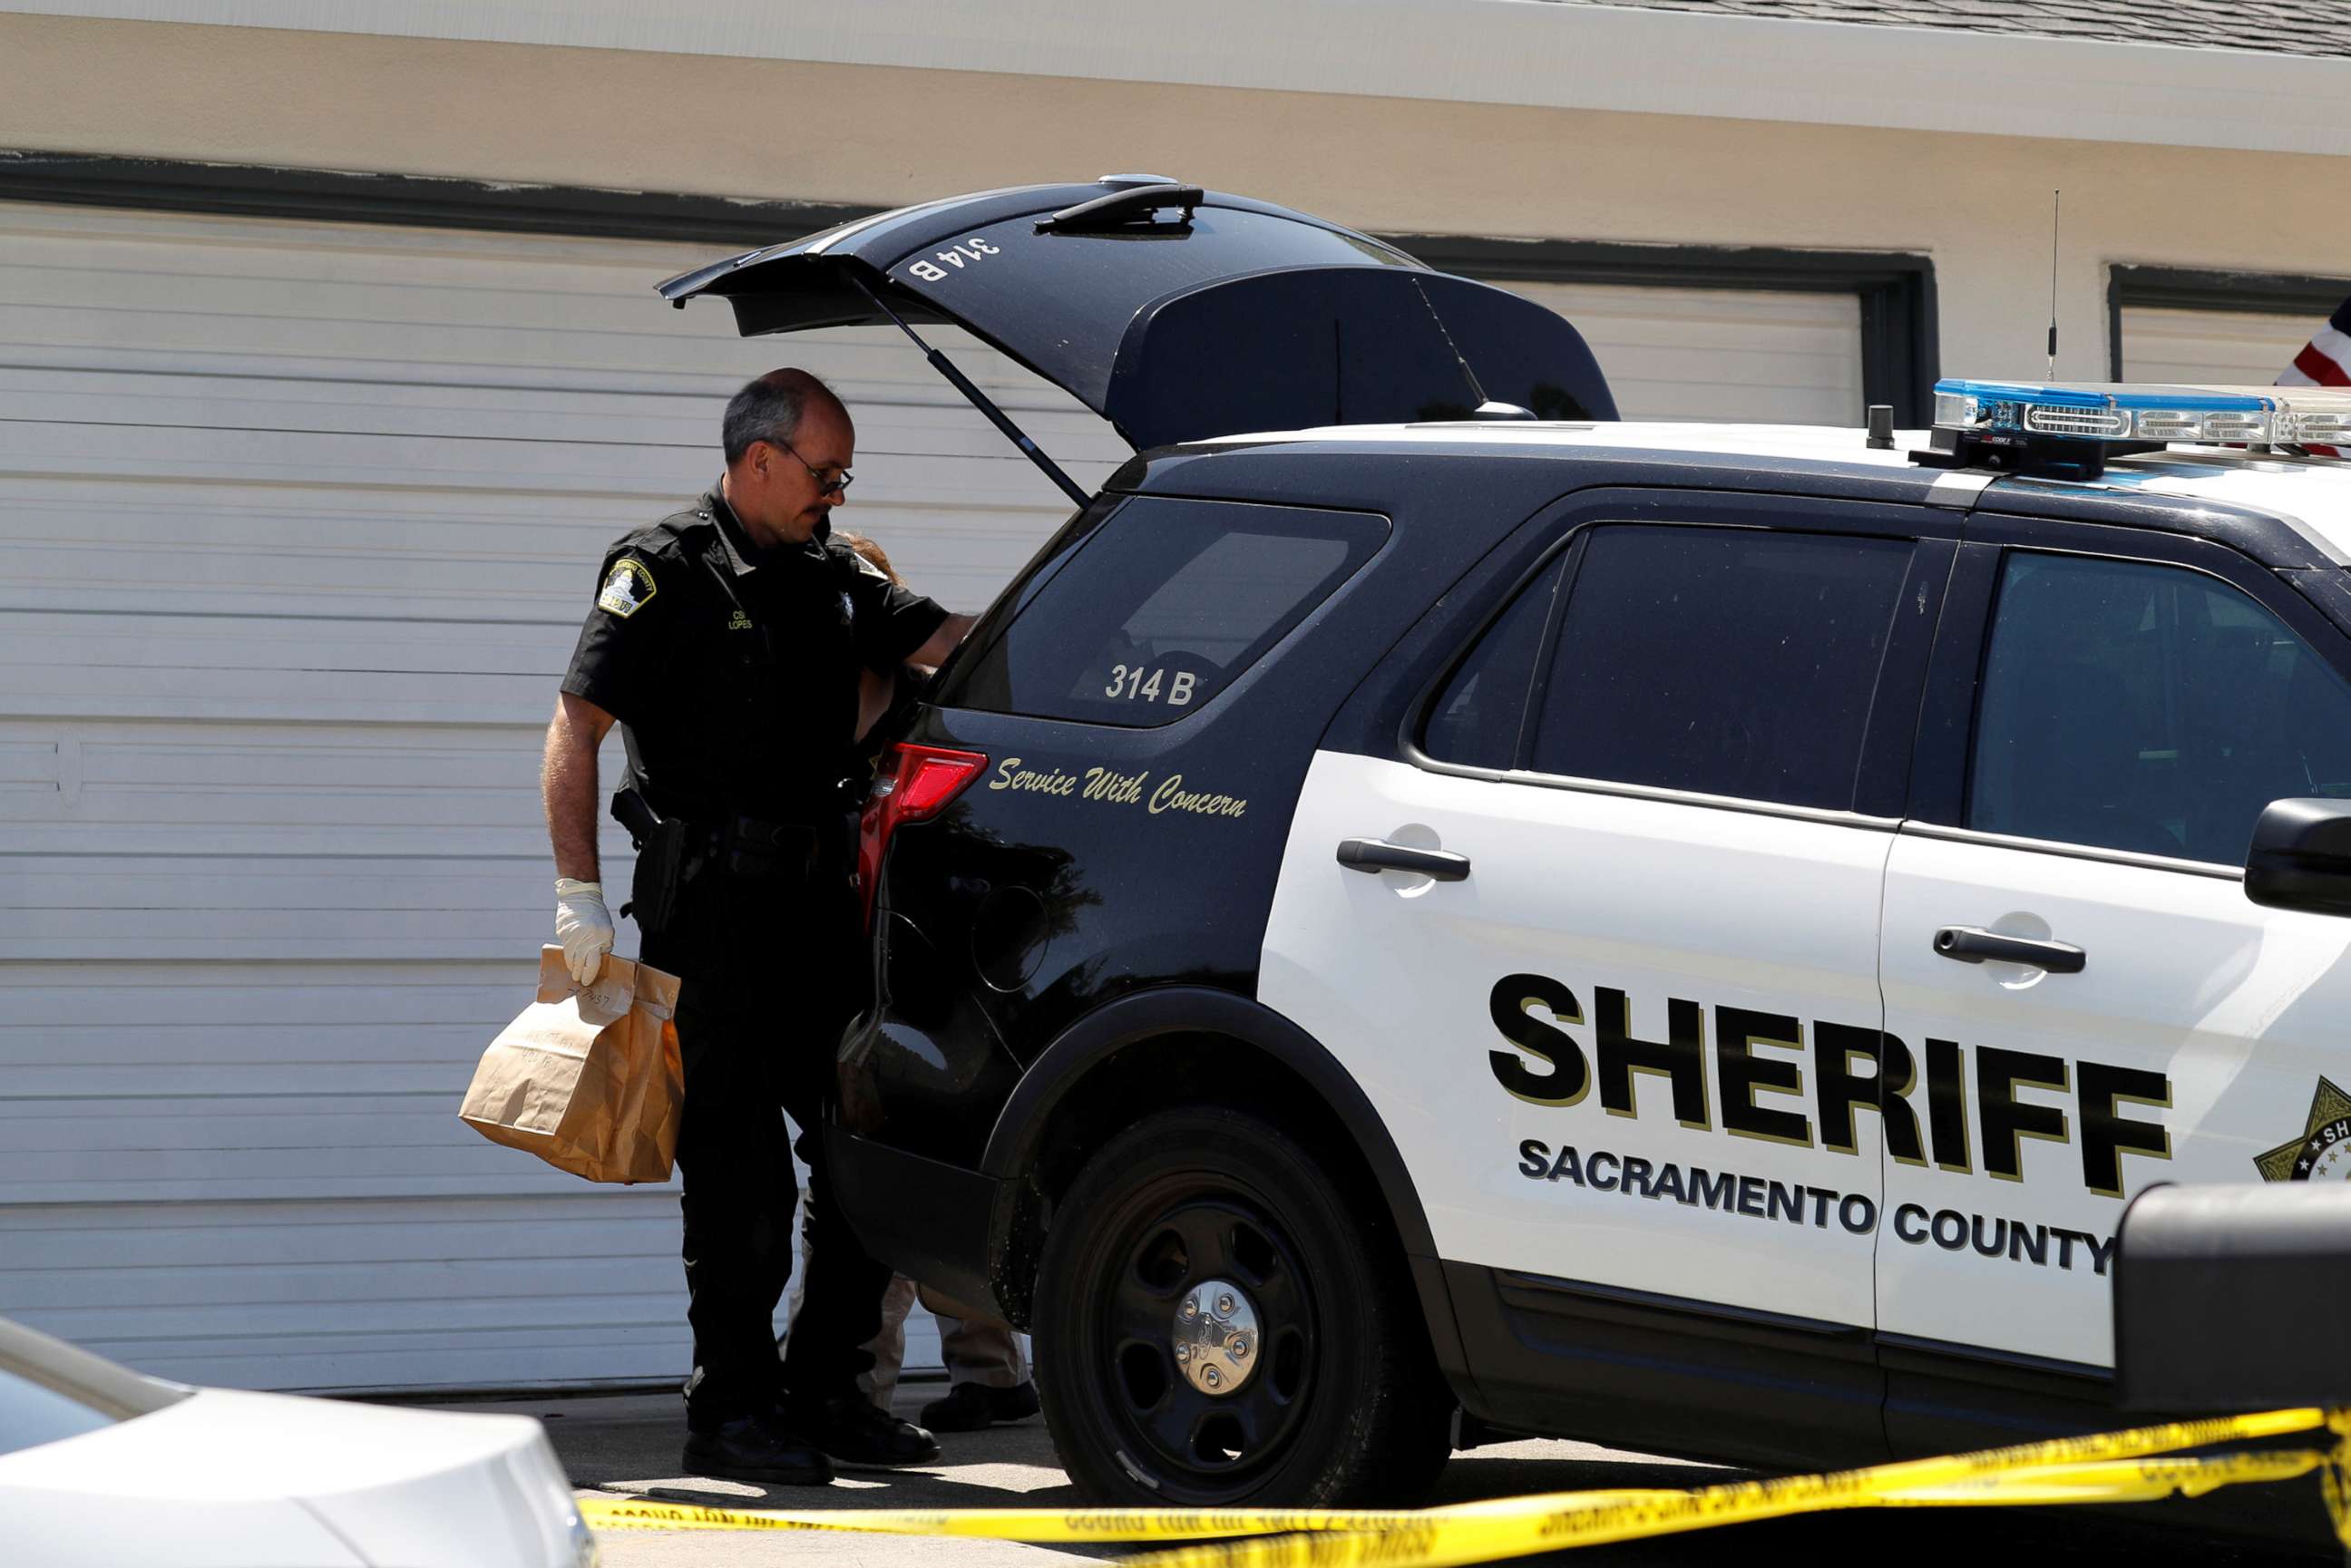 PHOTO: An investigator puts evidence bags in a sheriff's vehicle after removing them from the home of Joseph James Deangelo in Citrus Heights, Calif., April 26, 2018.